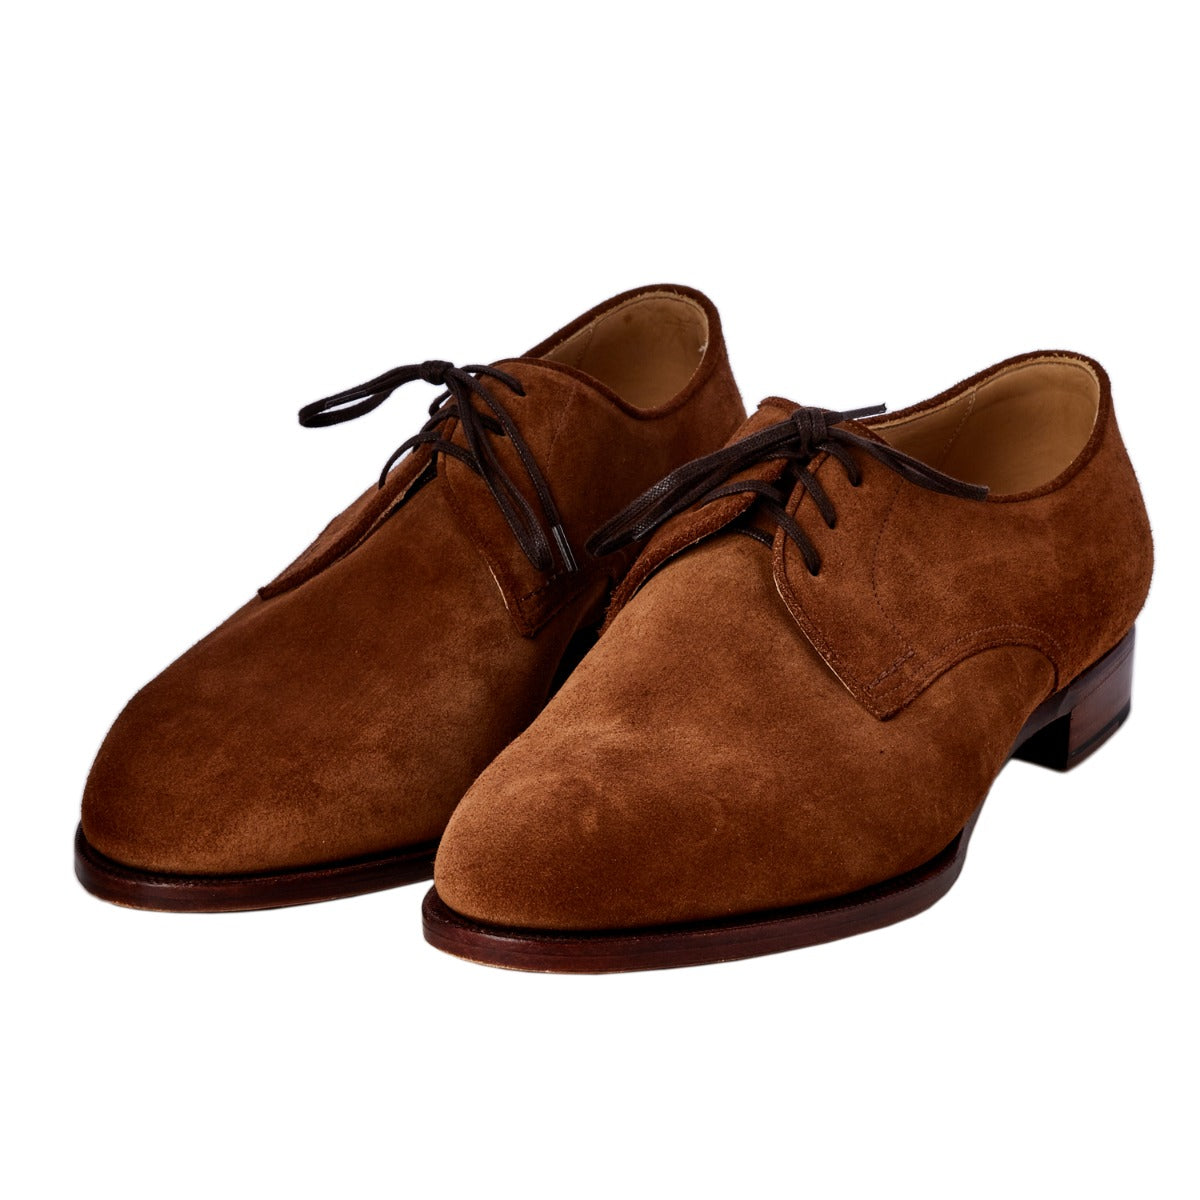 A pair of TLB Medium Brown Derby 8.5UK shoes by KirbyAllison.com on a white background.